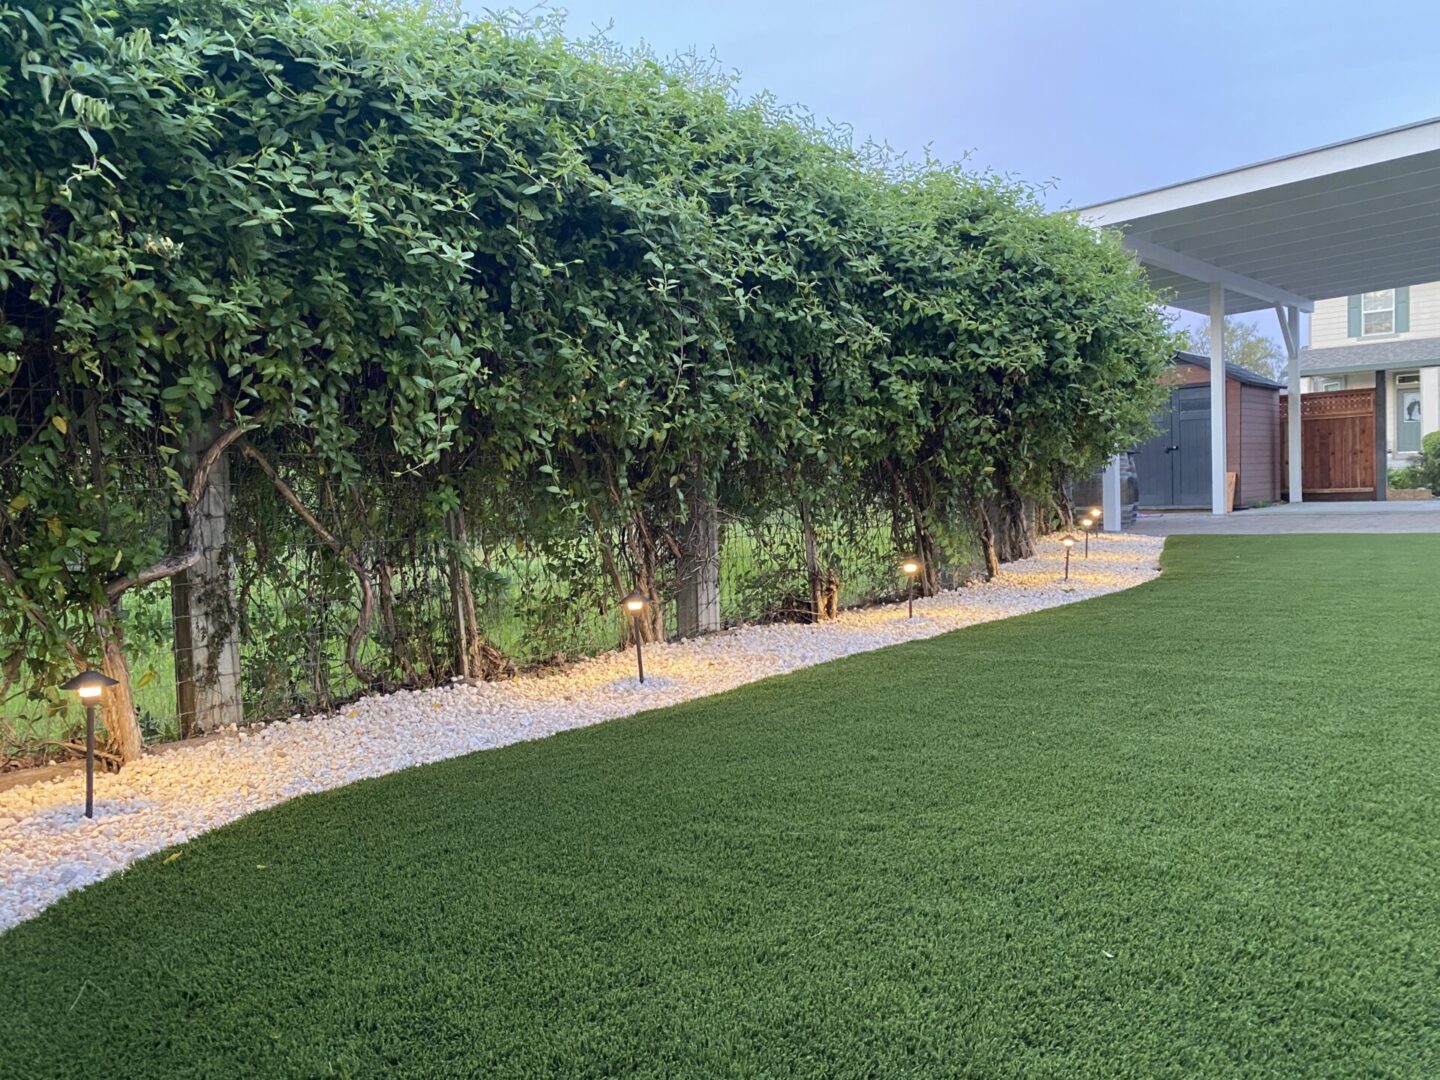 Artificial grass with garden path floor lamps, landscaping by Guys Yard Design in Sonoma, CA